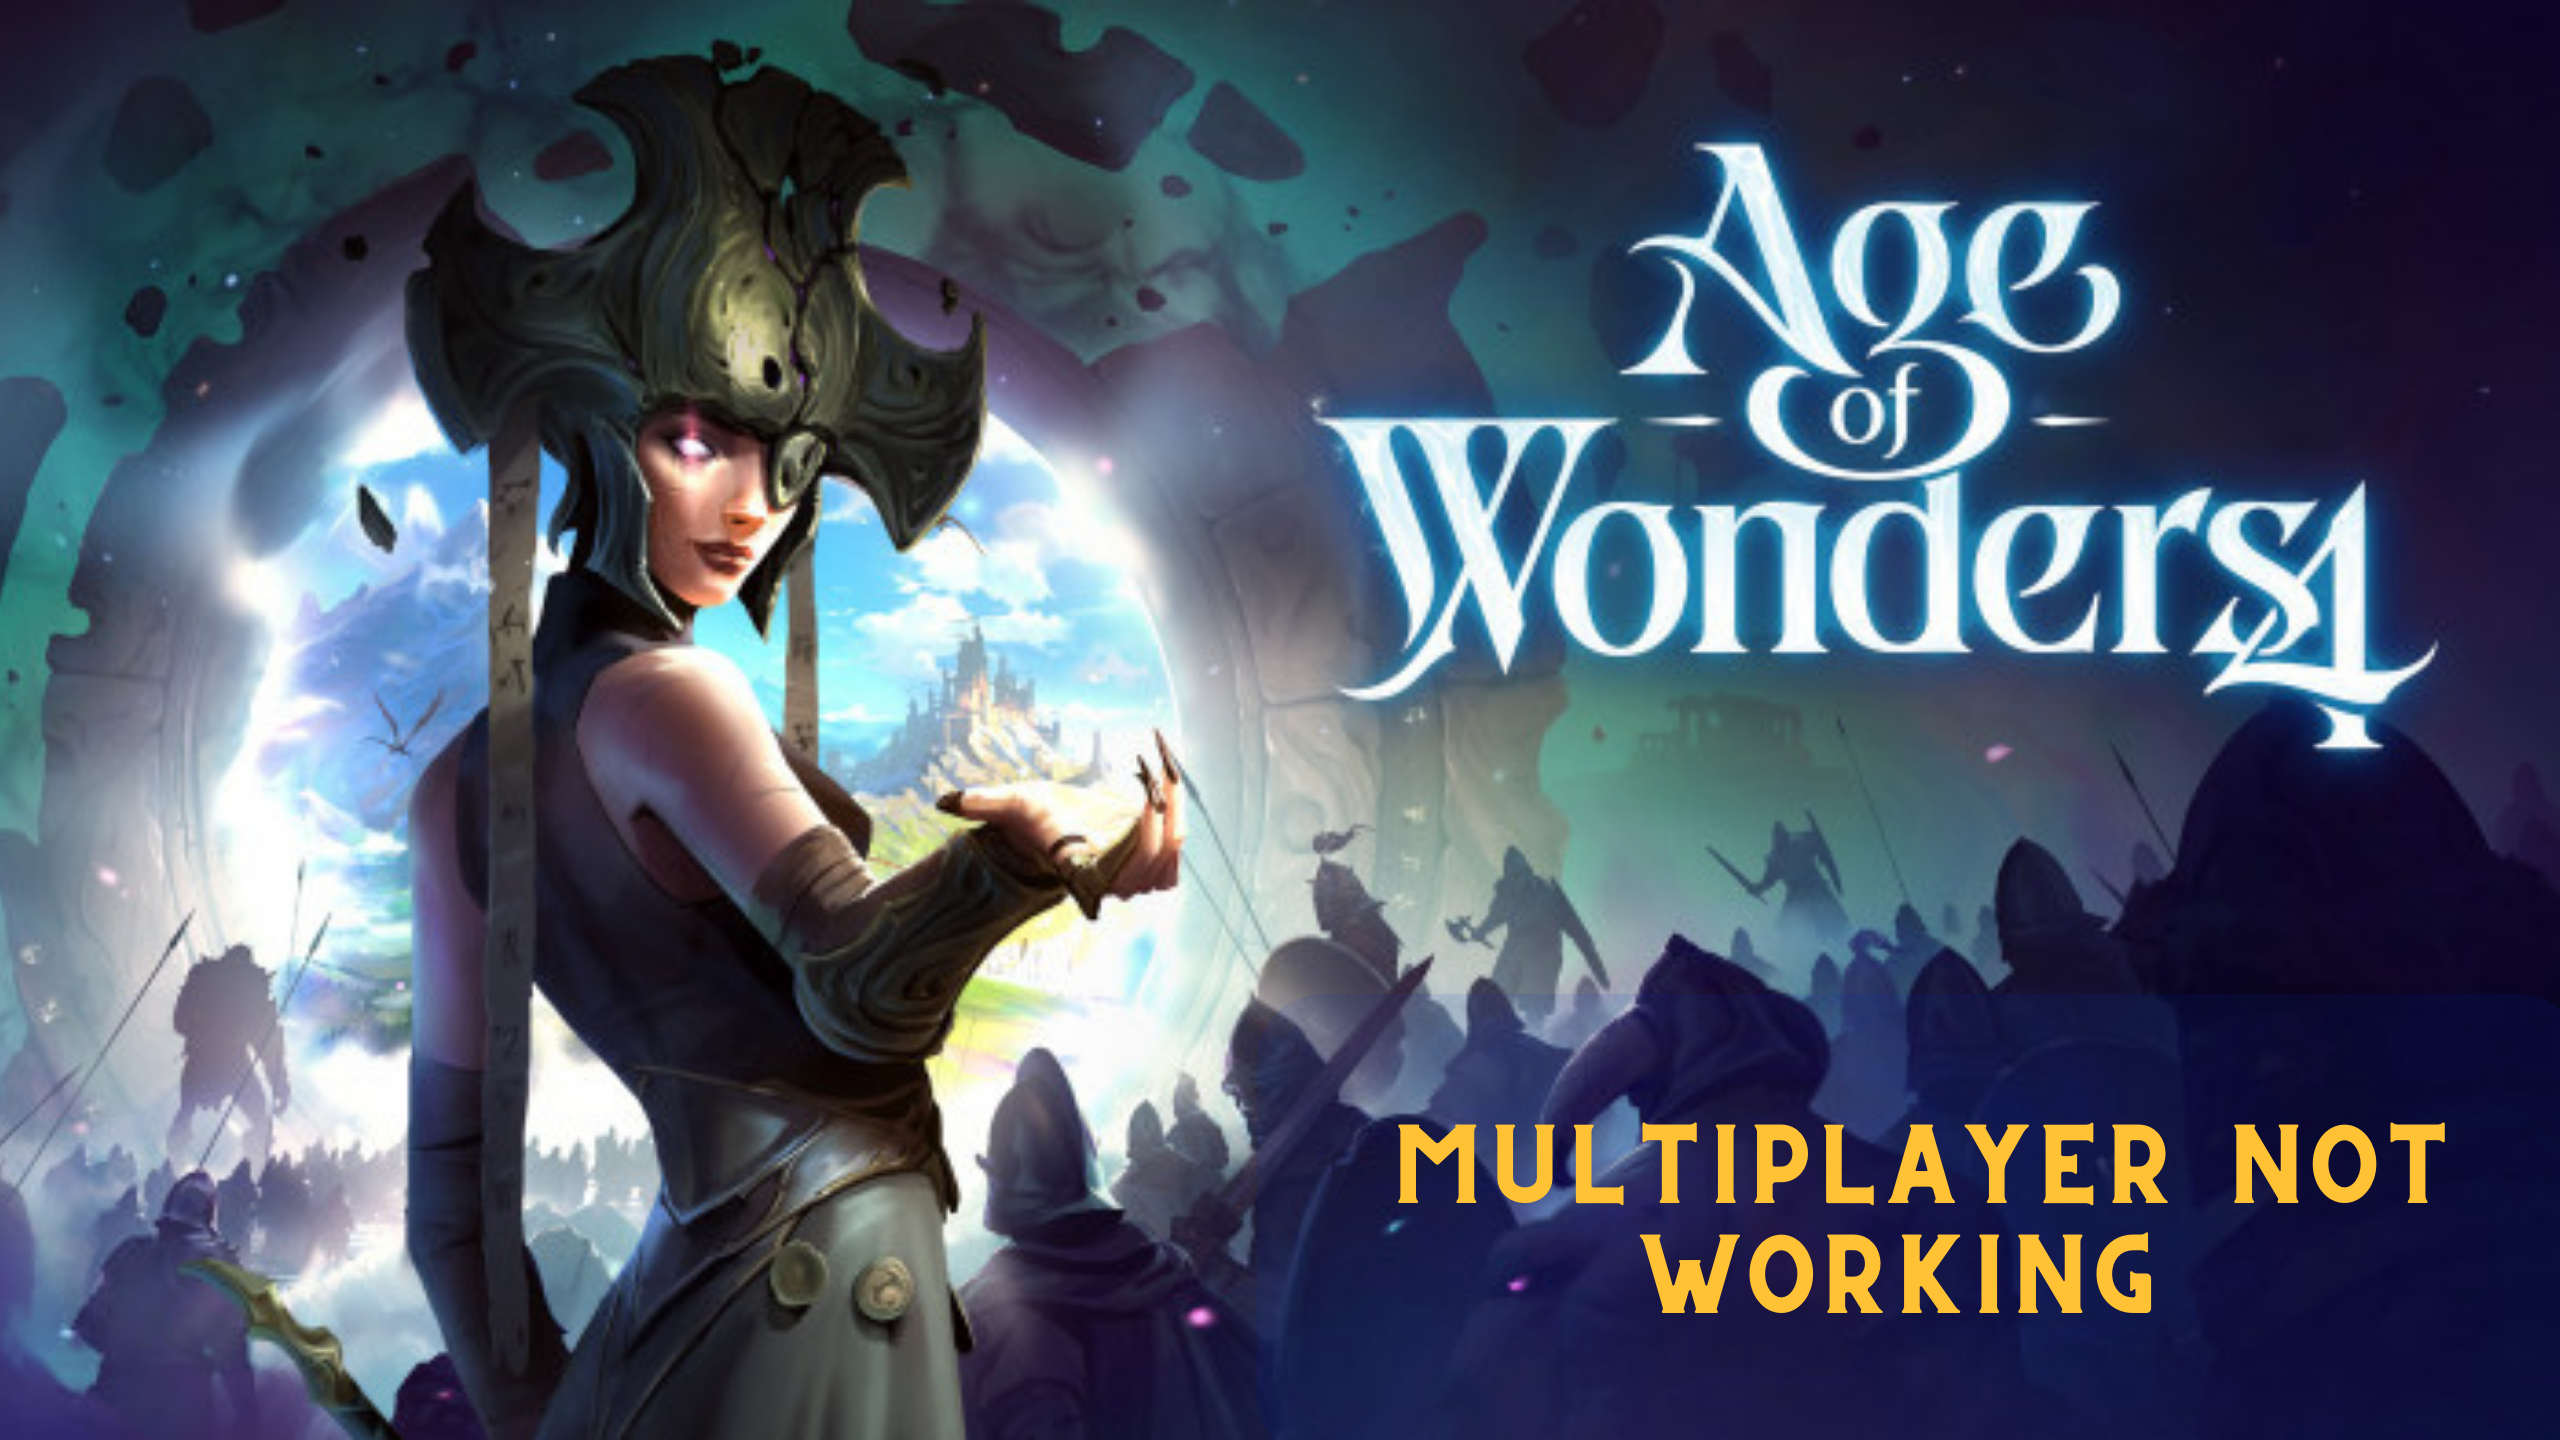 How to Fix Age of Wonders 4 Multiplayer Not Working